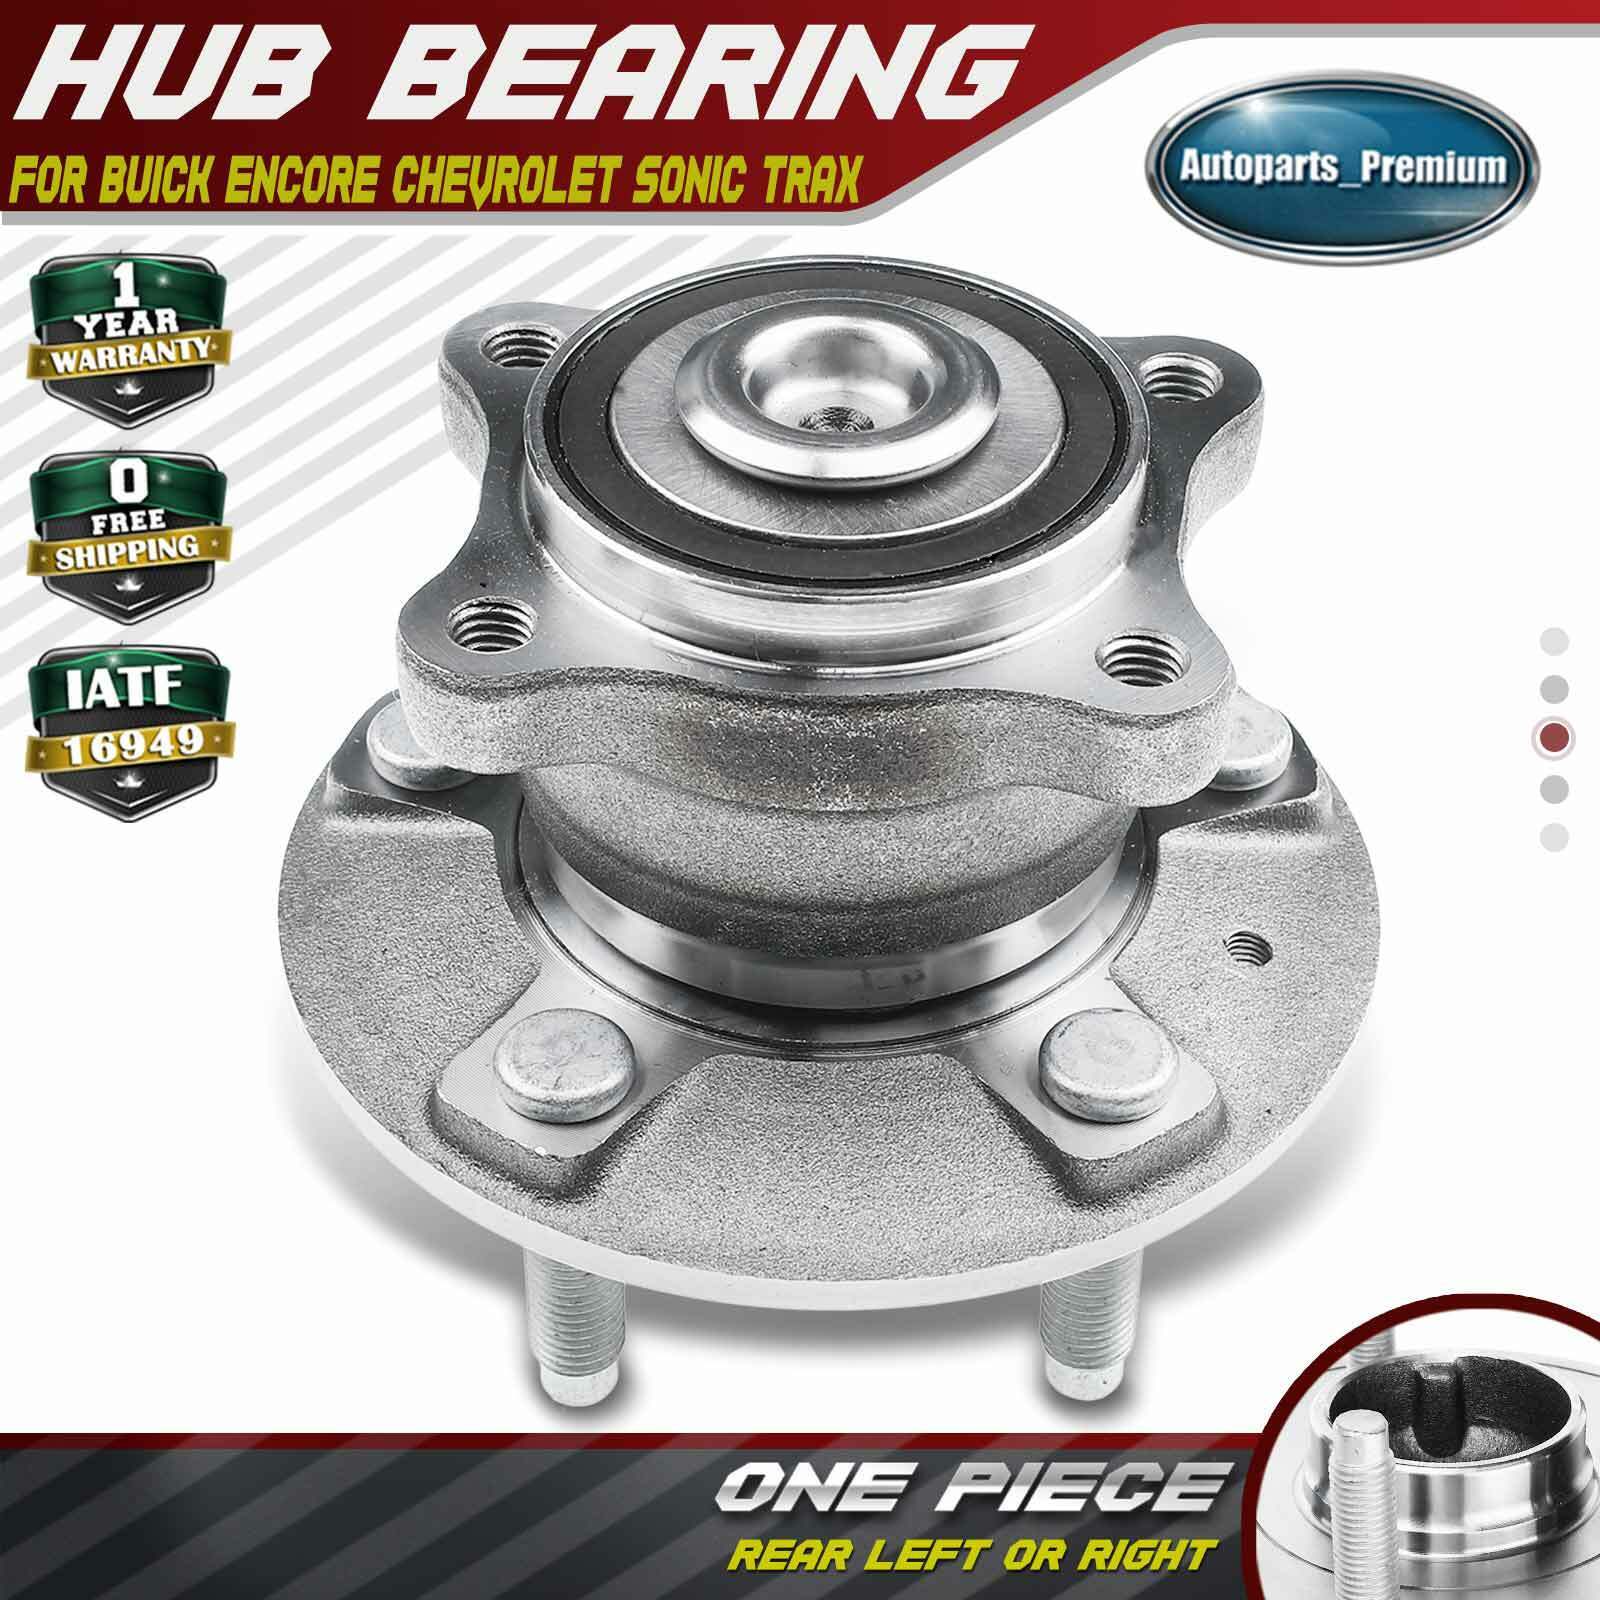 Rear LH or RH Wheel Hub Bearing Assembly for Chevrolet Sonic Trax Buick Encore